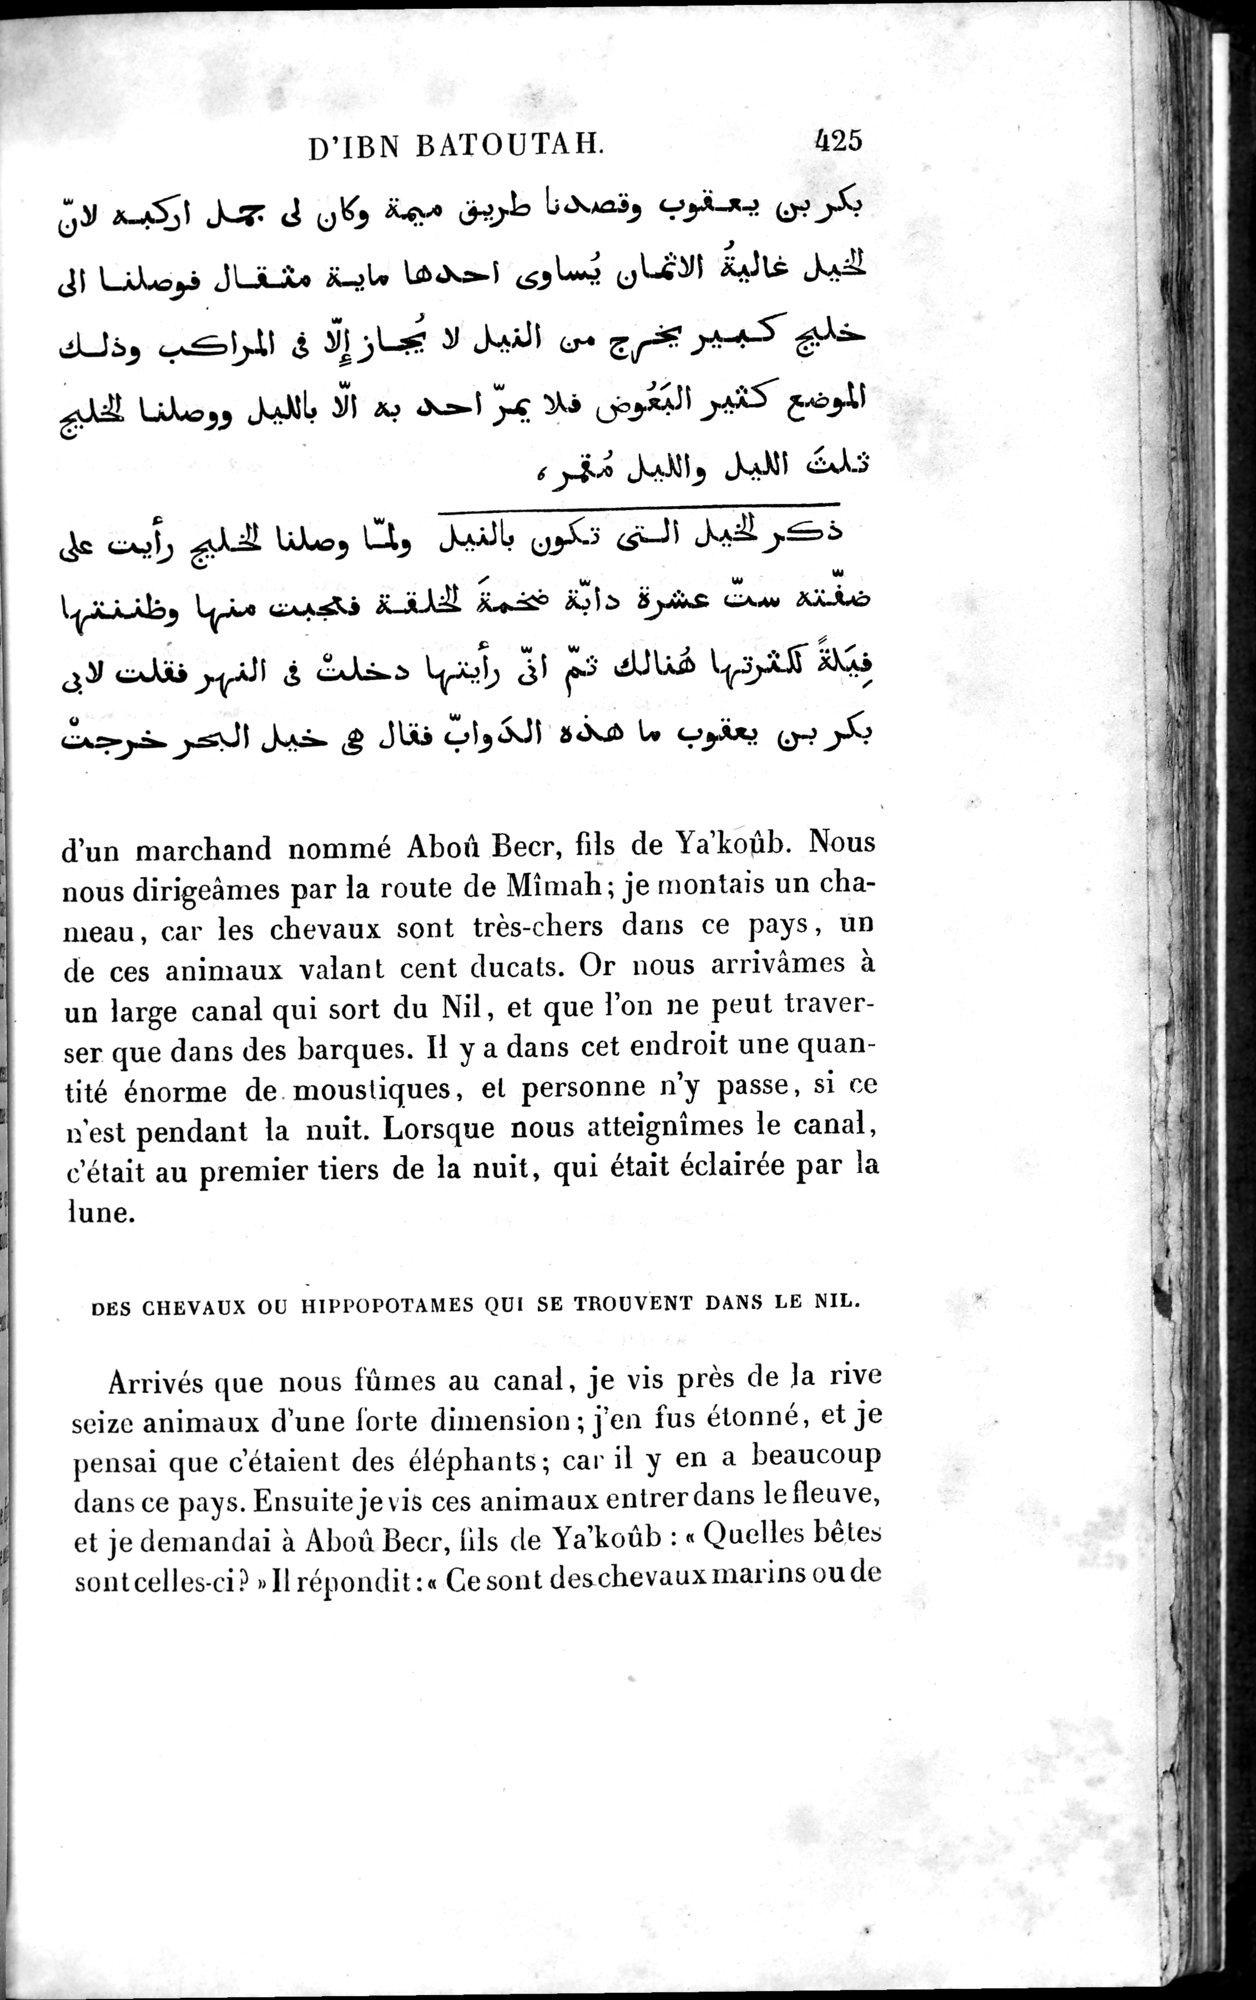 Voyages d'Ibn Batoutah : vol.4 / Page 437 (Grayscale High Resolution Image)